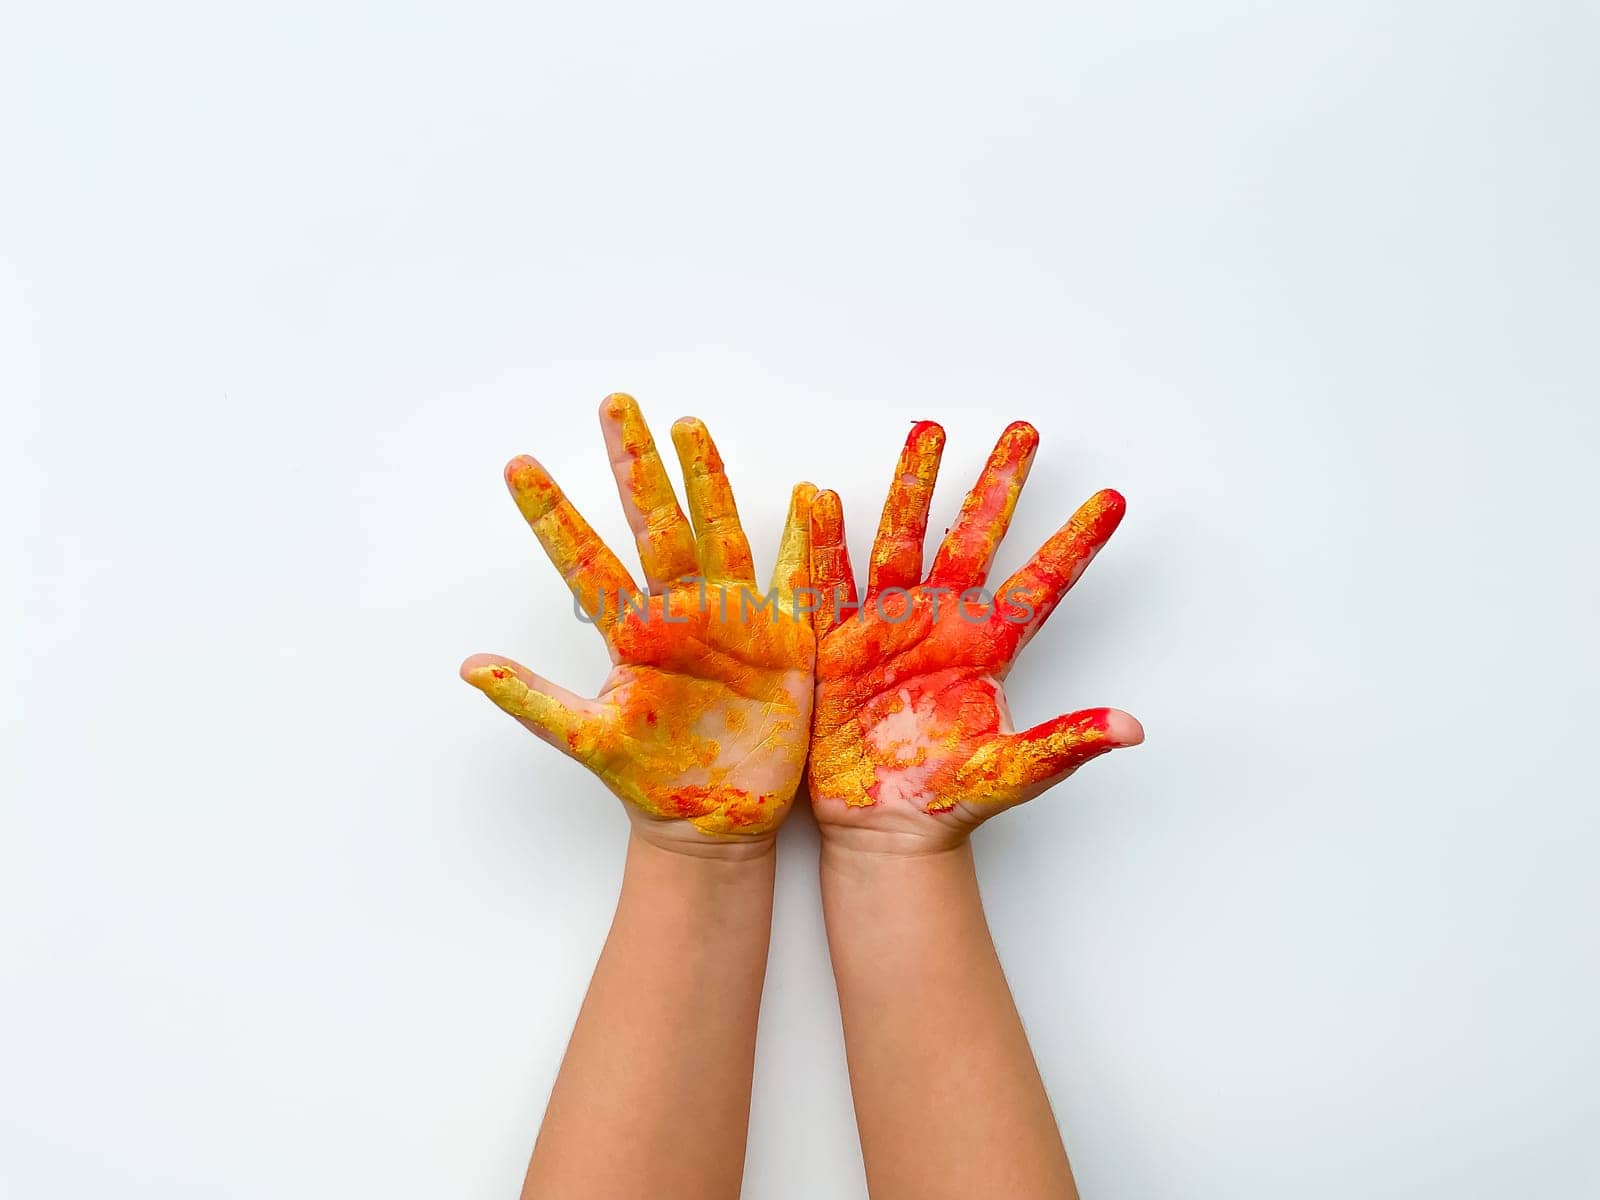 Childrens hands painted with yellow and red paint on white background. by Lunnica